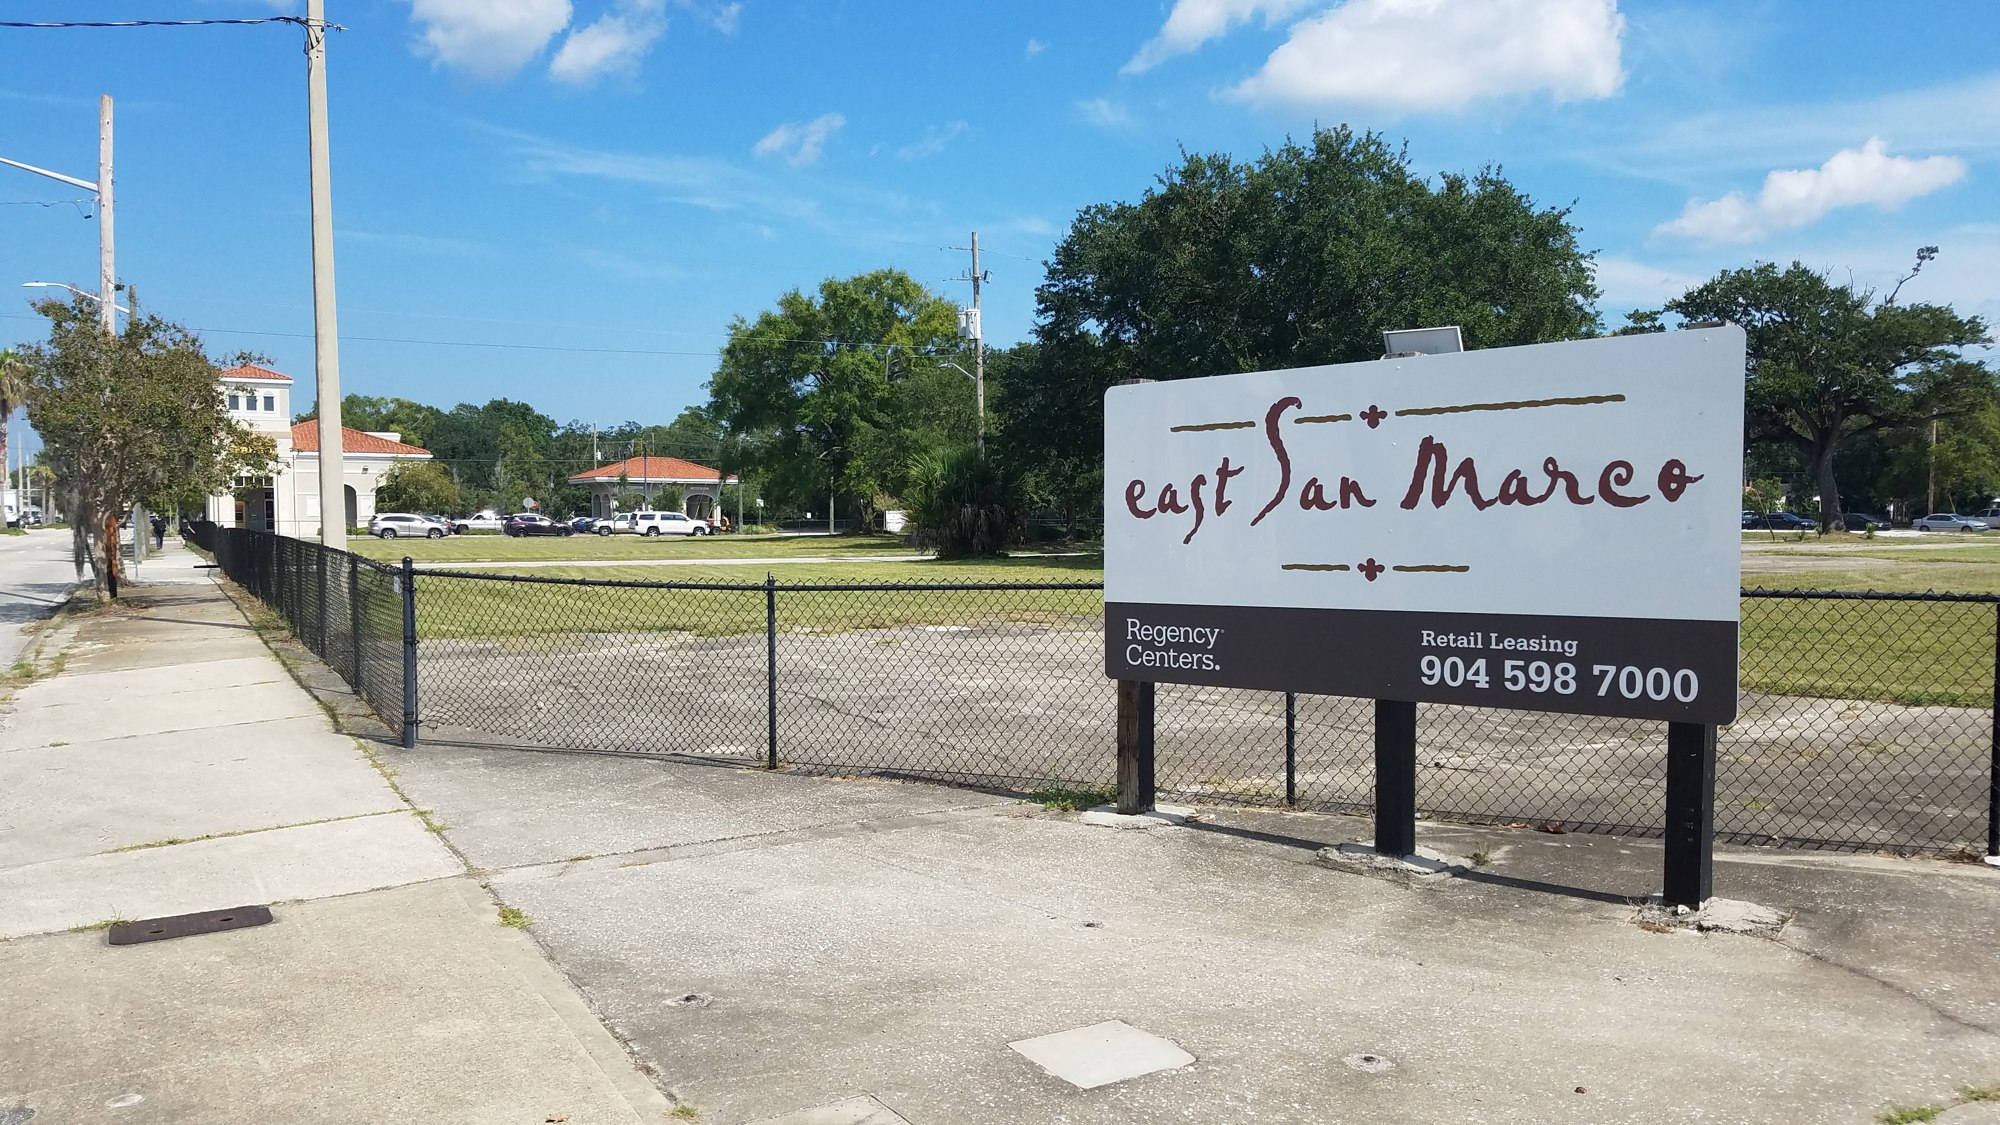 East San Marco is planned on 4.3 acres of vacant land it owns at 1532 Atlantic Blvd.